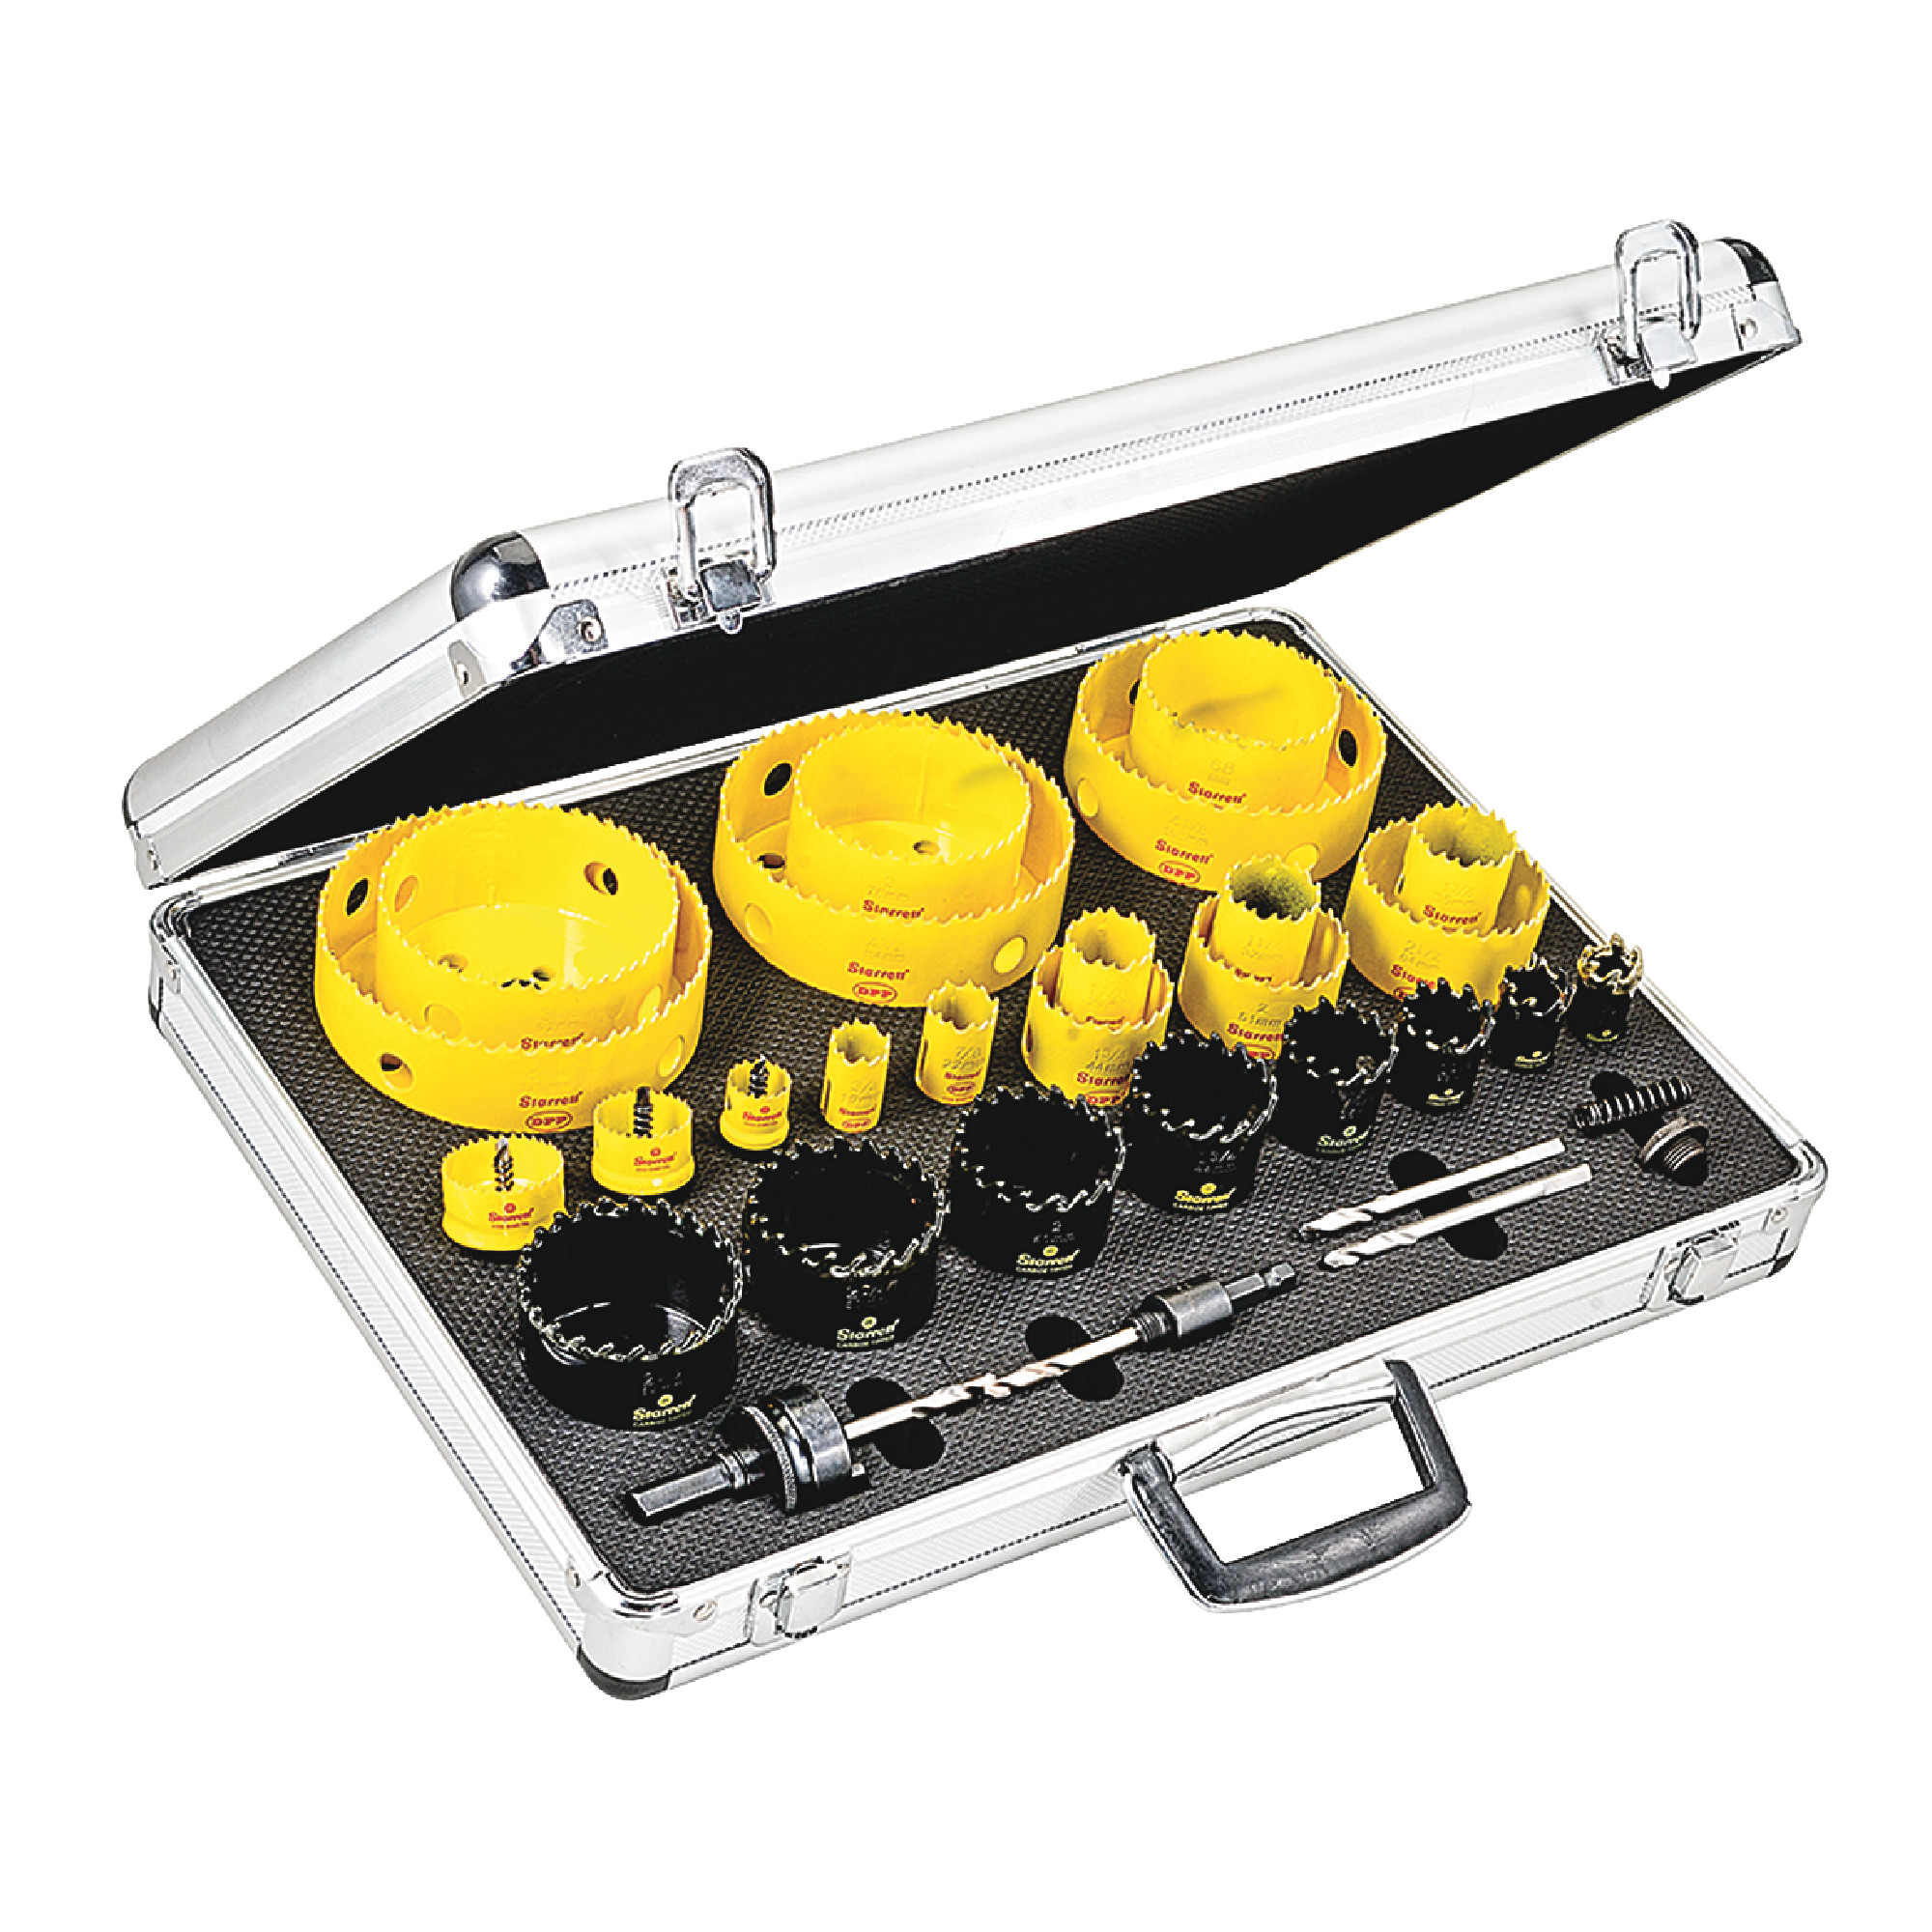 Starrett KMX25061-N 31 Piece Bi-Metal/Carbide Tipped/Cordless Smooth Cut Electrician's Hole Saw Set with Aluminum Case